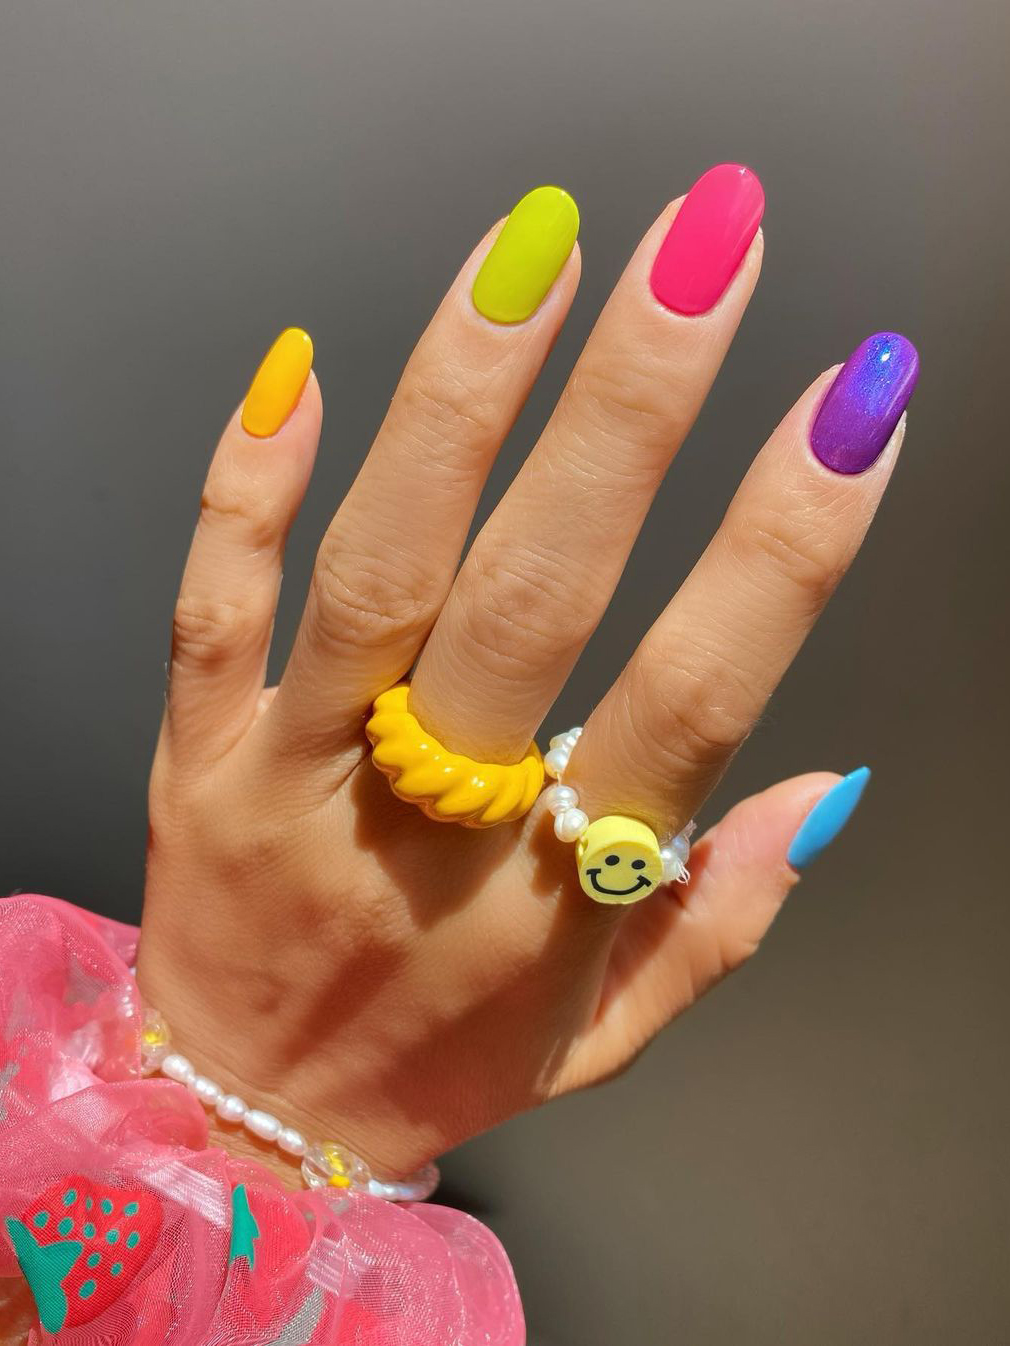 5 Beach Nail Colors That You'll Want to Wear All Summer Long